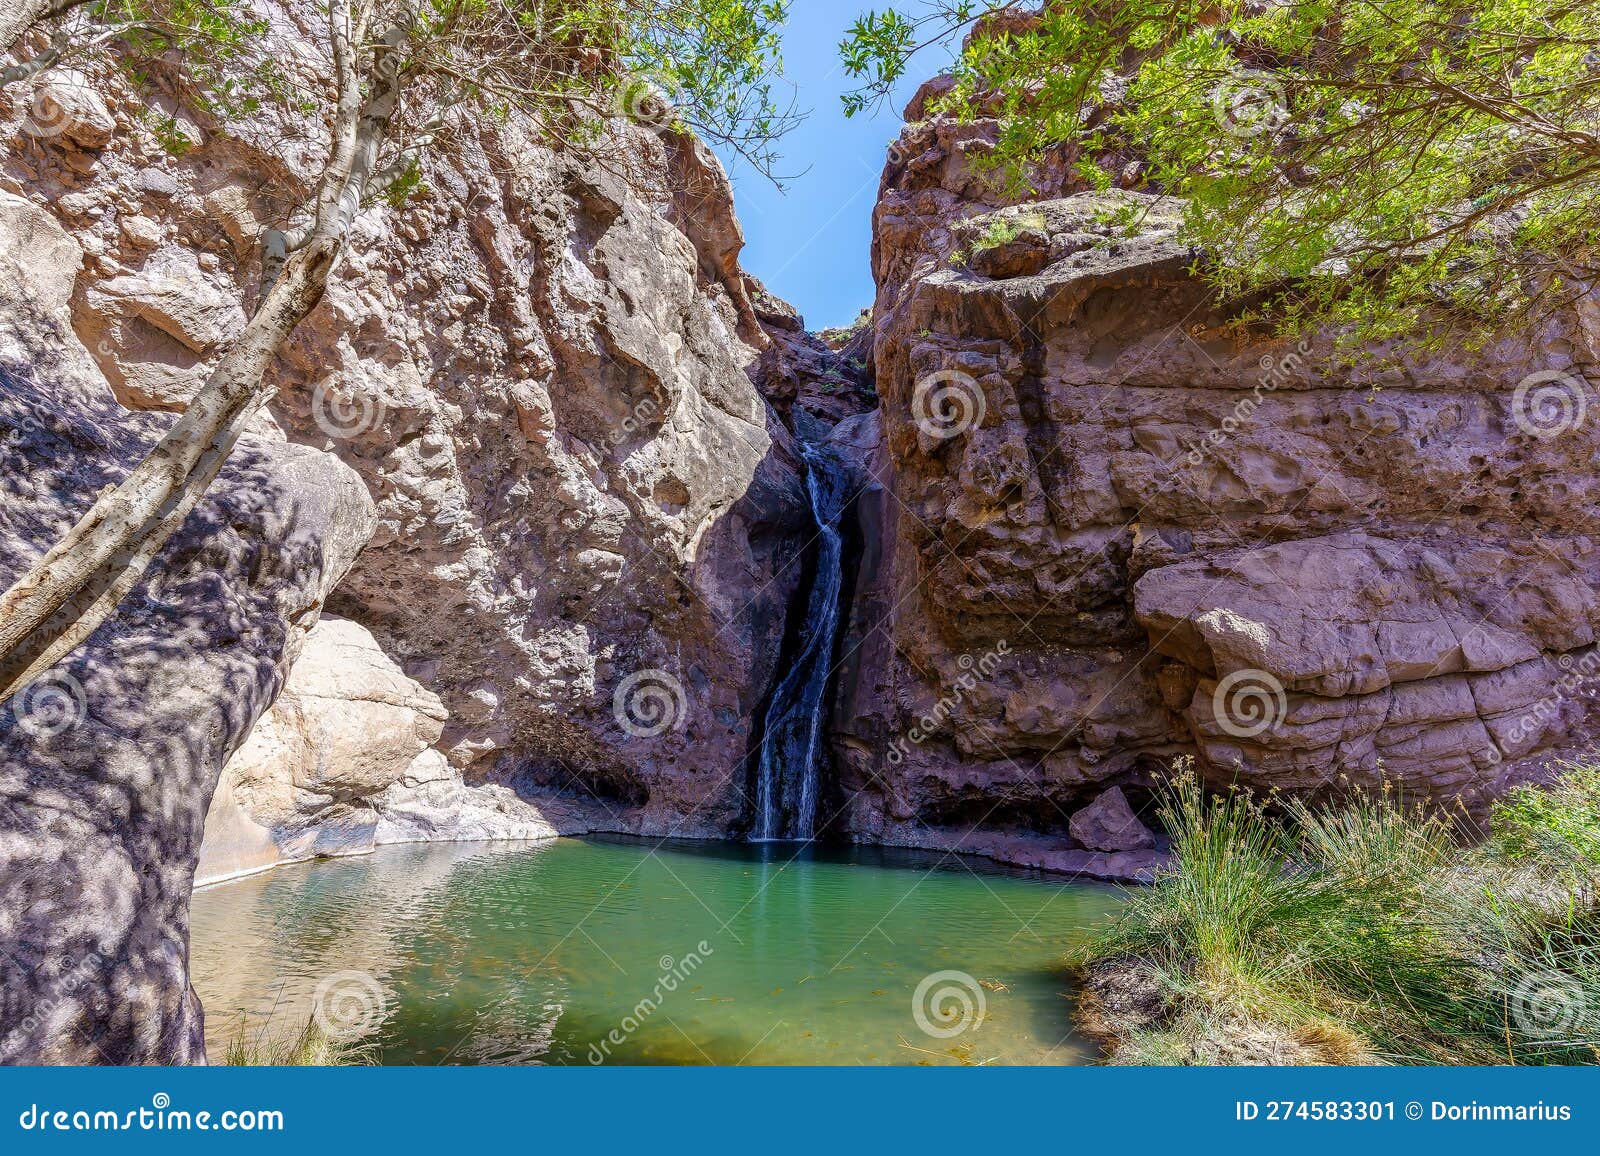 landscape with el charco azul waterfall, gran canary